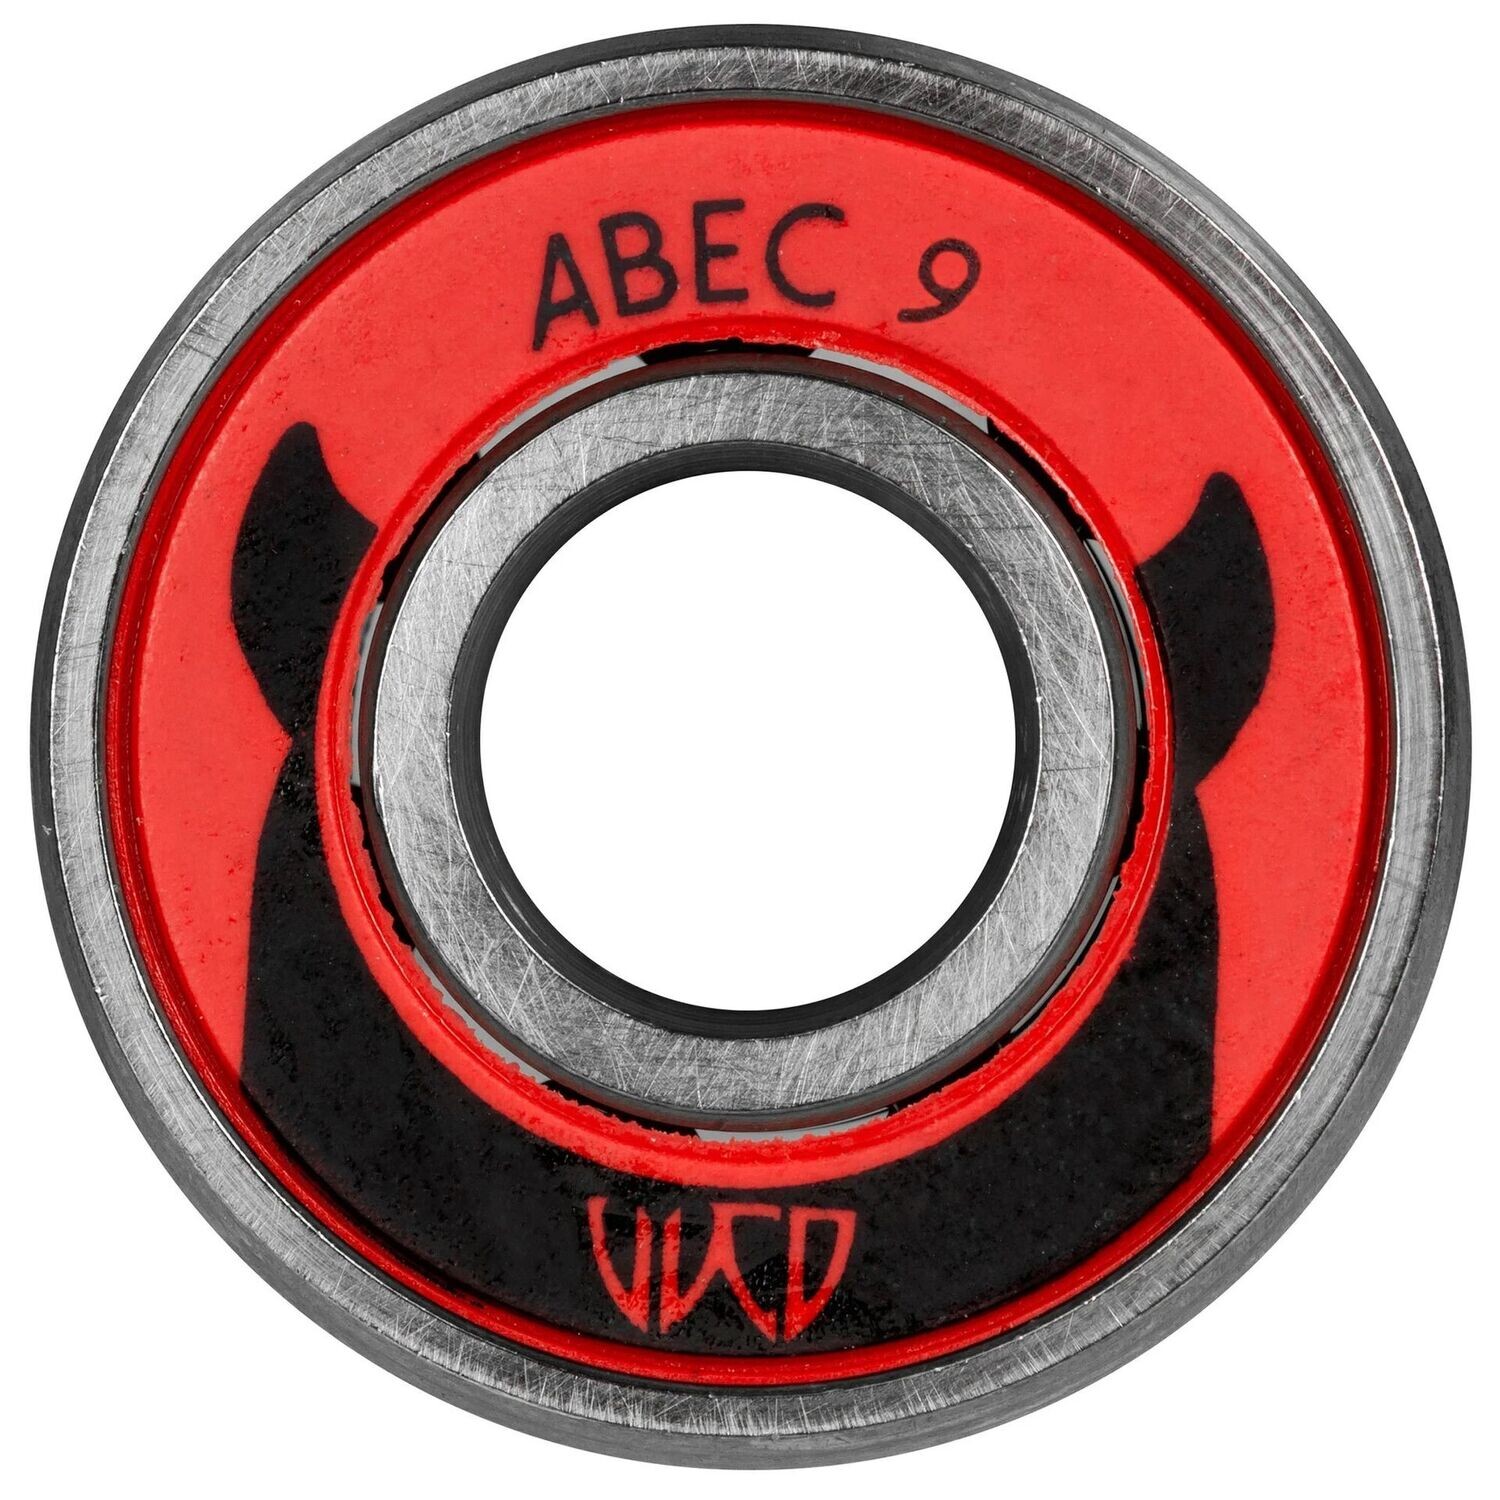 Wicked ABEC 9 FS, 16 pack